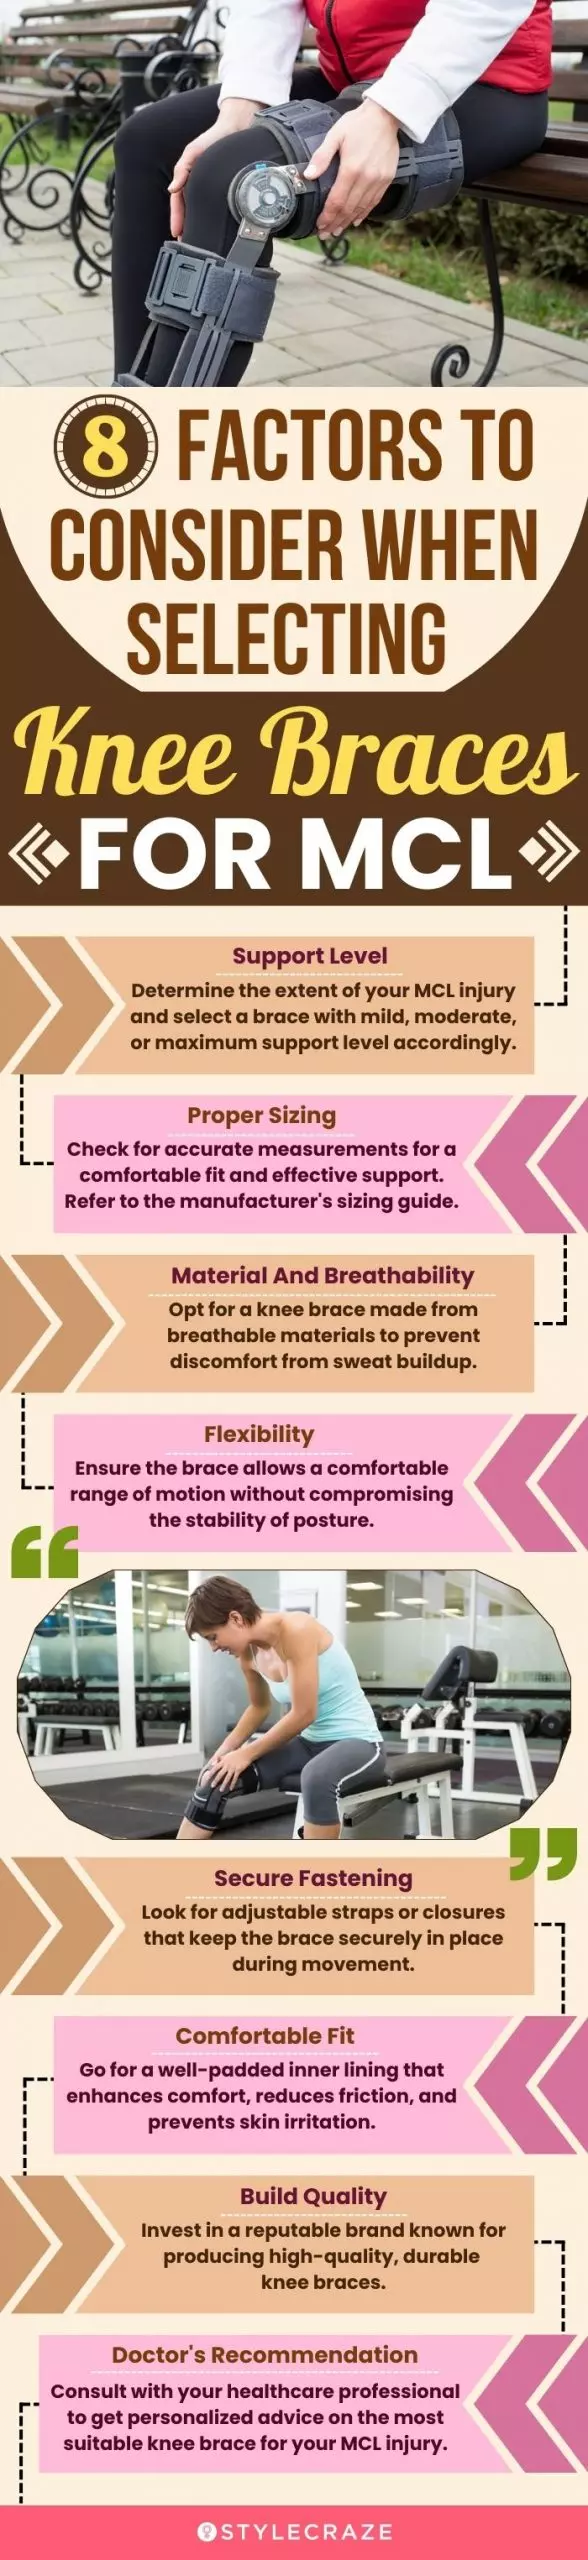 8 Factors To Consider When Selecting Knee Braces For MCL (infographic)